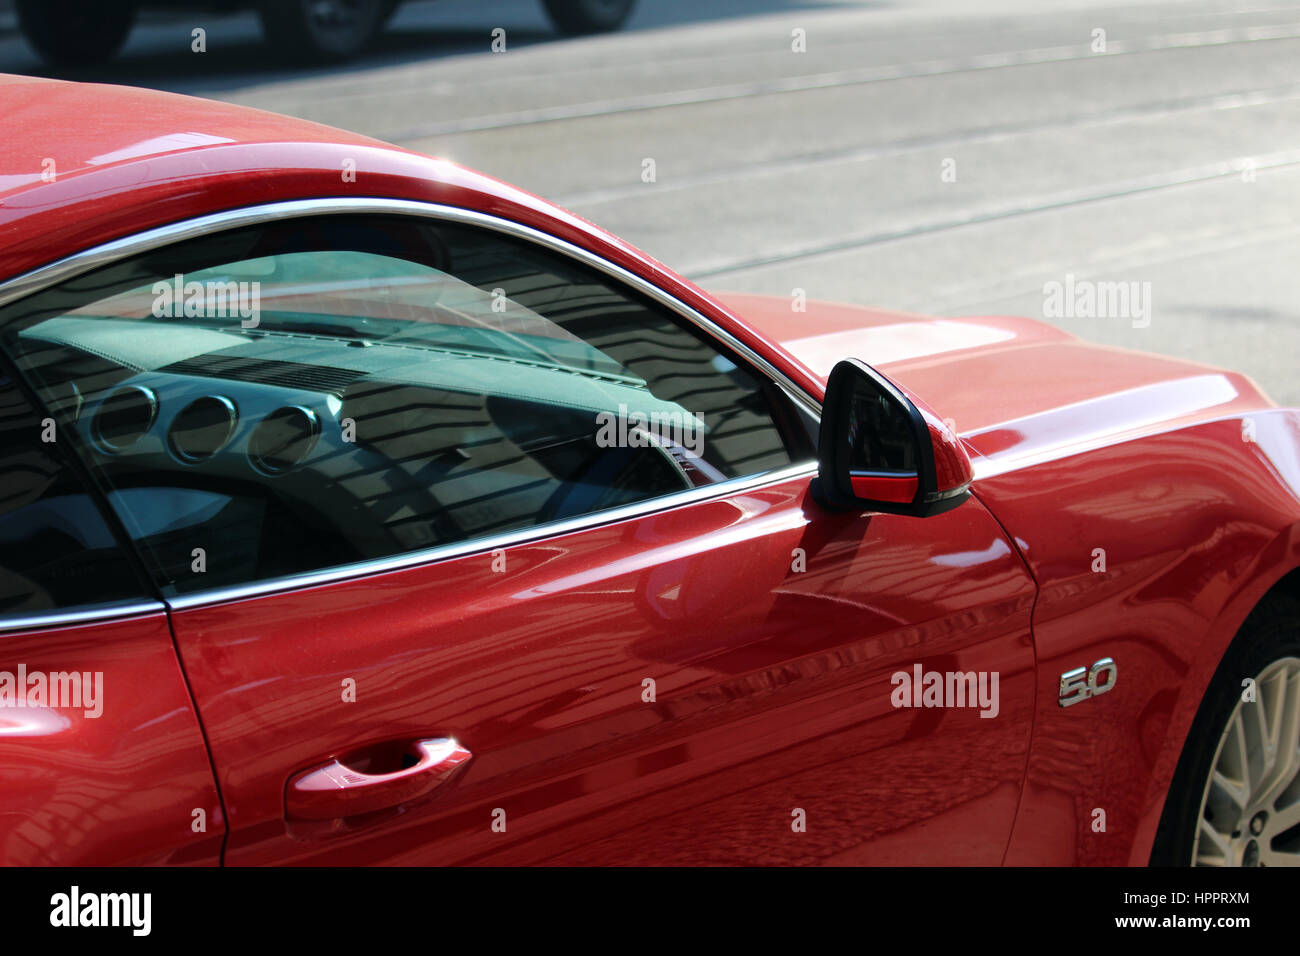 detail of red luxury car on the road Stock Photo